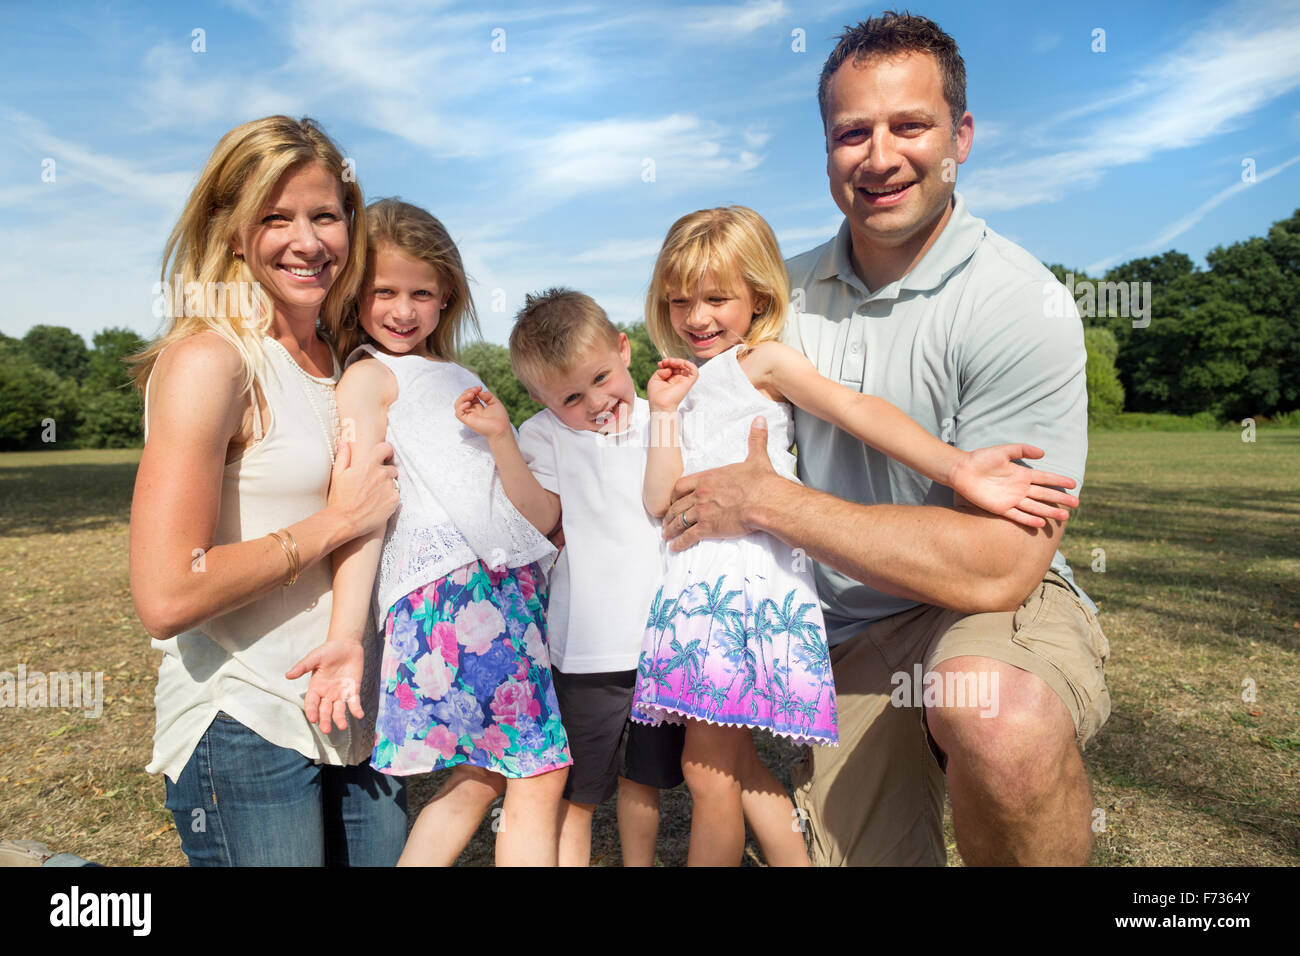 Family with three children in a park, posing for a picture. Stock Photo